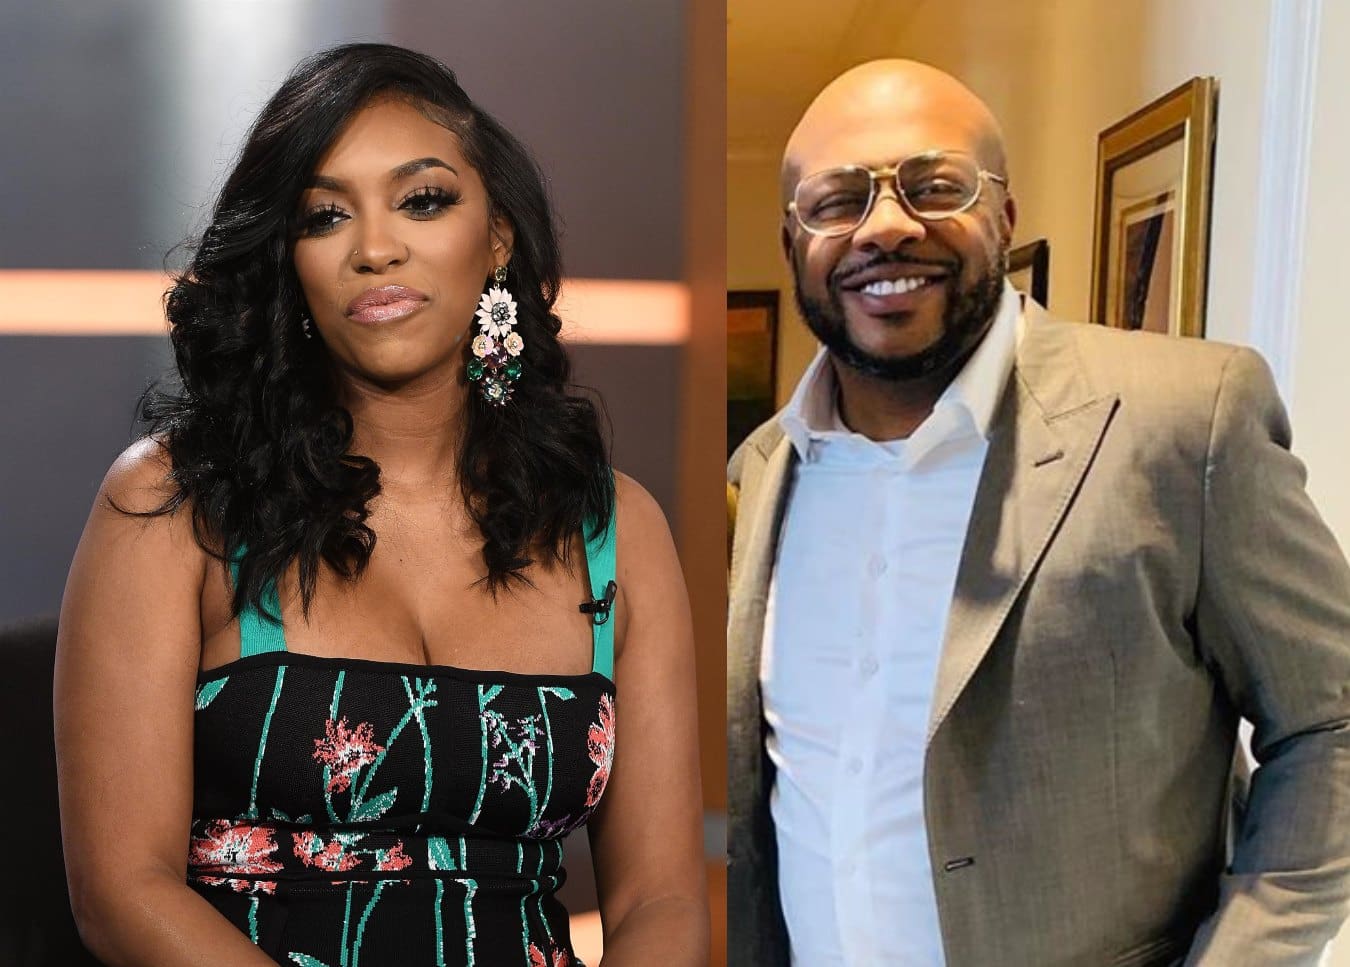 Porsha Williams' Fans Are Proud Of Her And Dennis McKinley For Being Proactive During The Protests